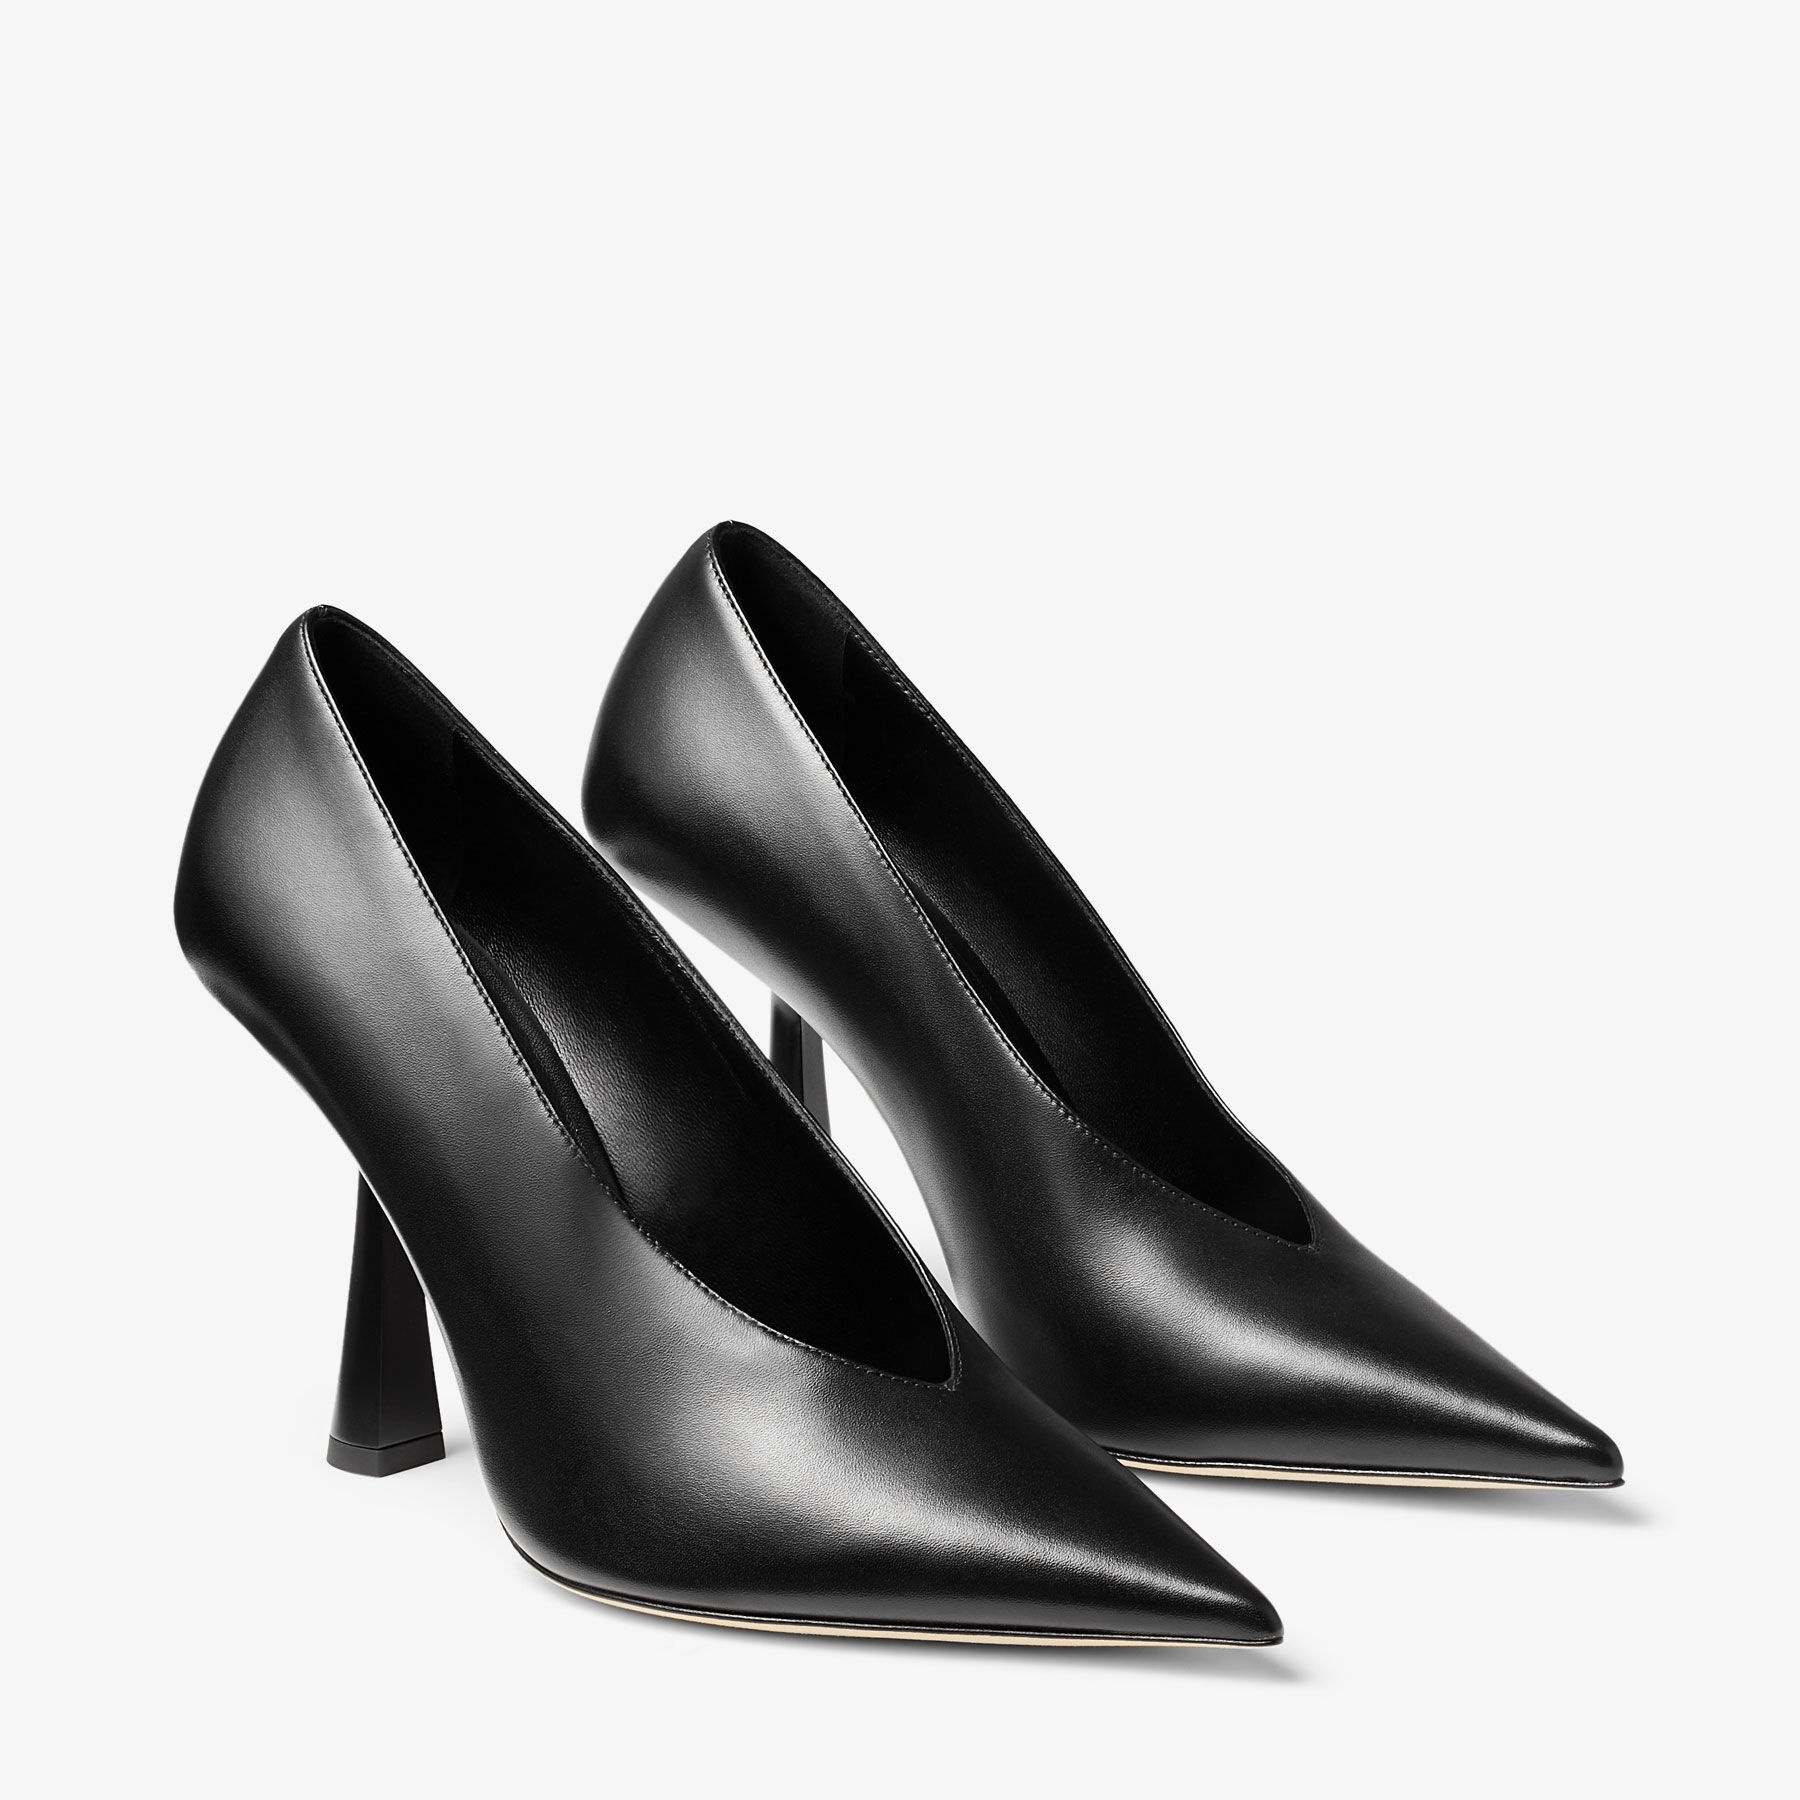 Maryanne 100
Black Calf Leather Pointed-Toe Pumps - 2